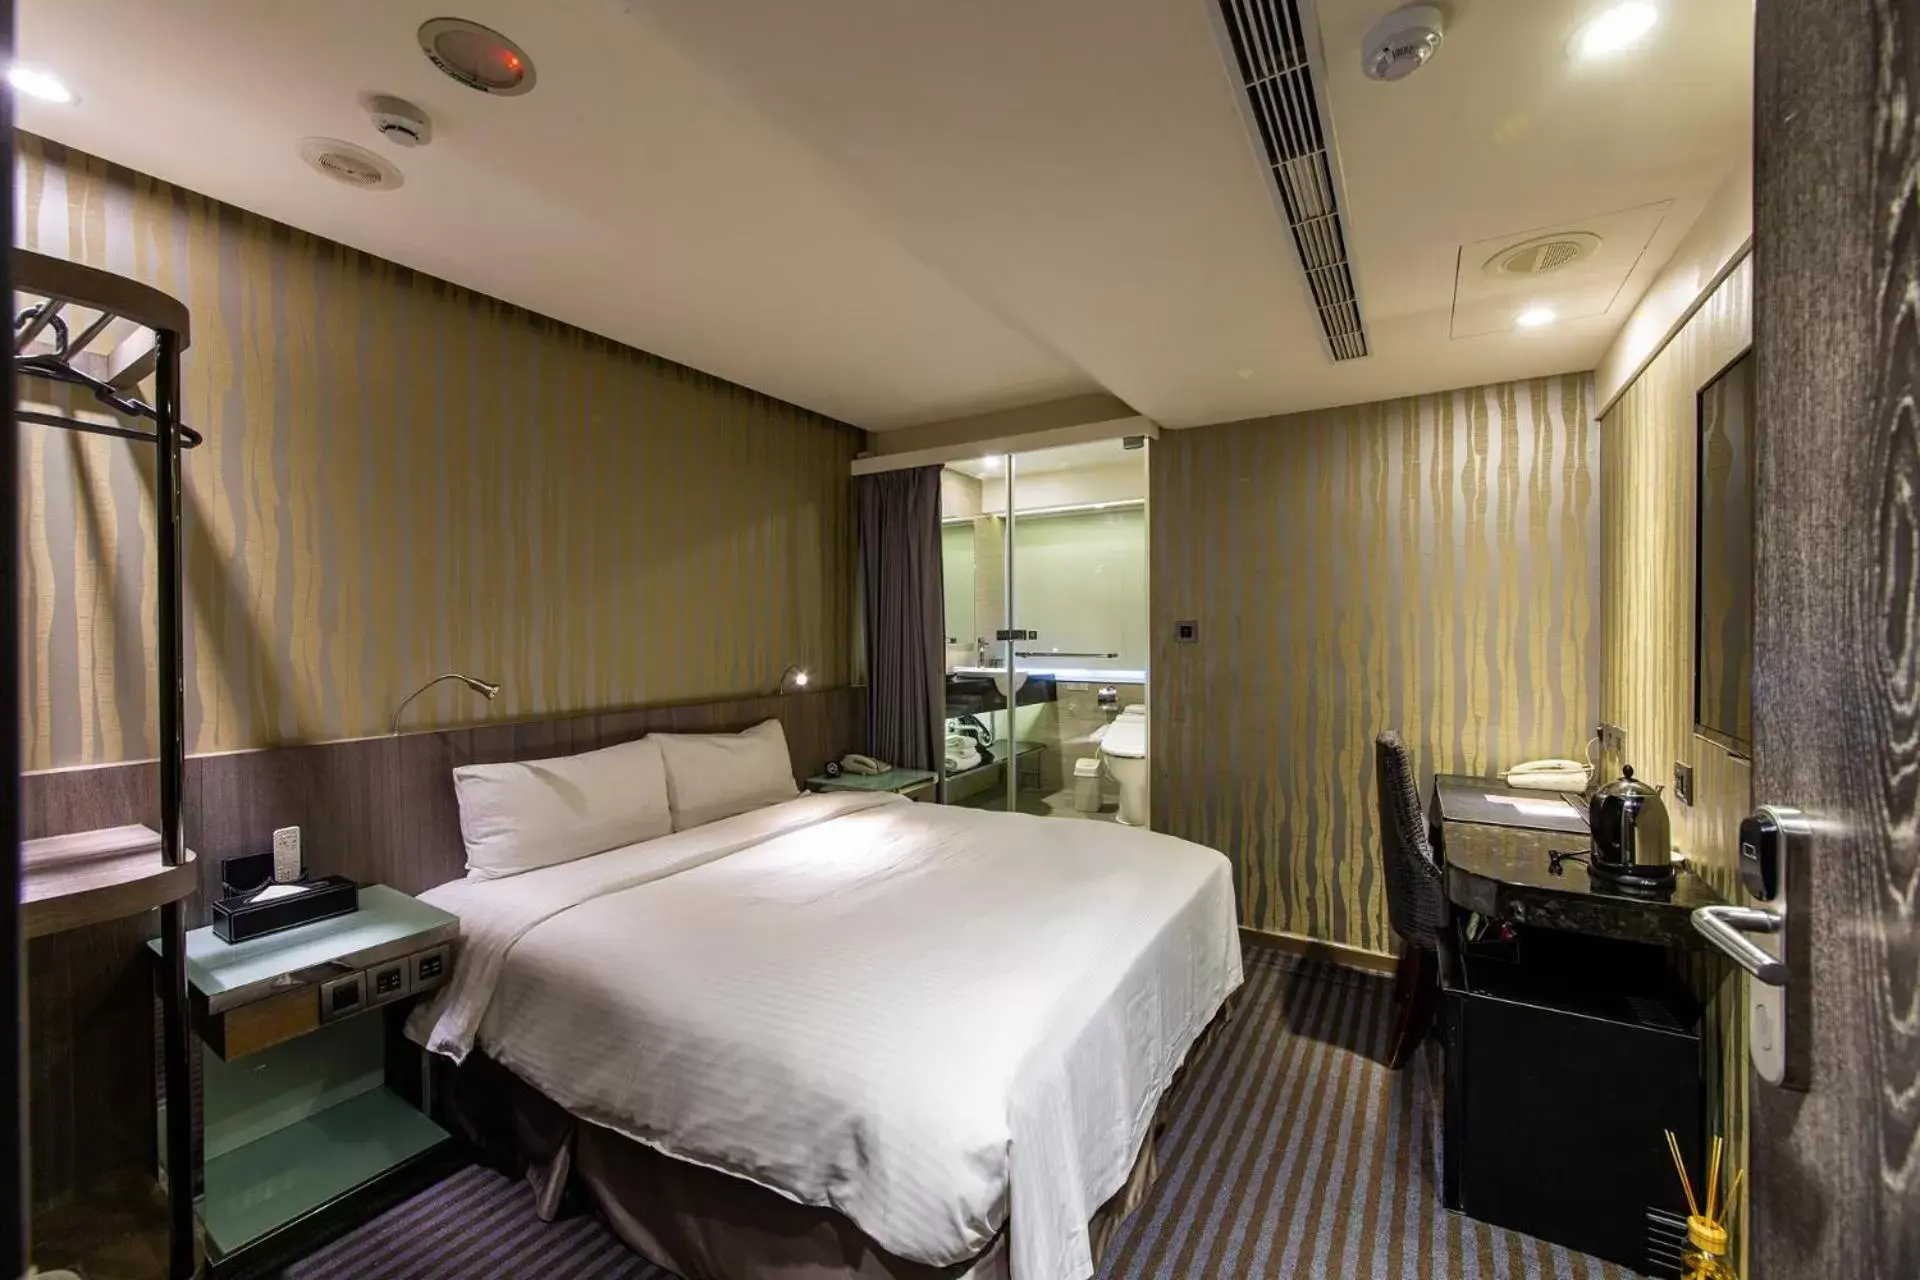 Bedroom, Bed in Beauty Hotels - Hotel Bnight-Self Check-In Hotel